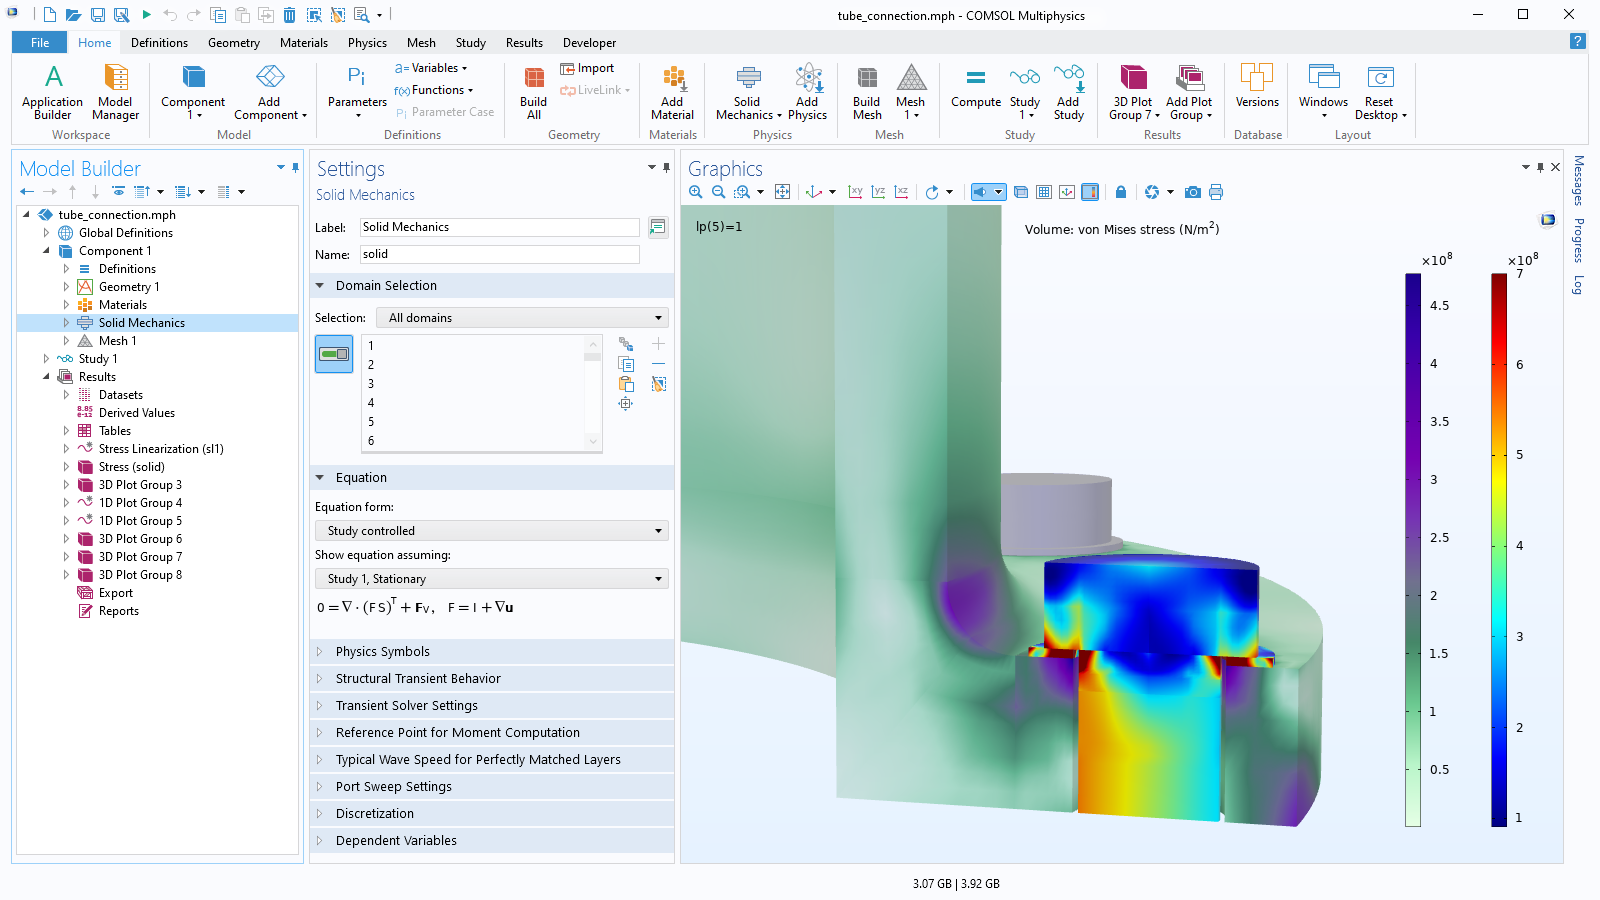 The COMSOL Multiphysics UI showing the Model Builder with the Solid Mechanics node highlighted, the corresponding Settings window, and a tube connection model in the Graphics window.